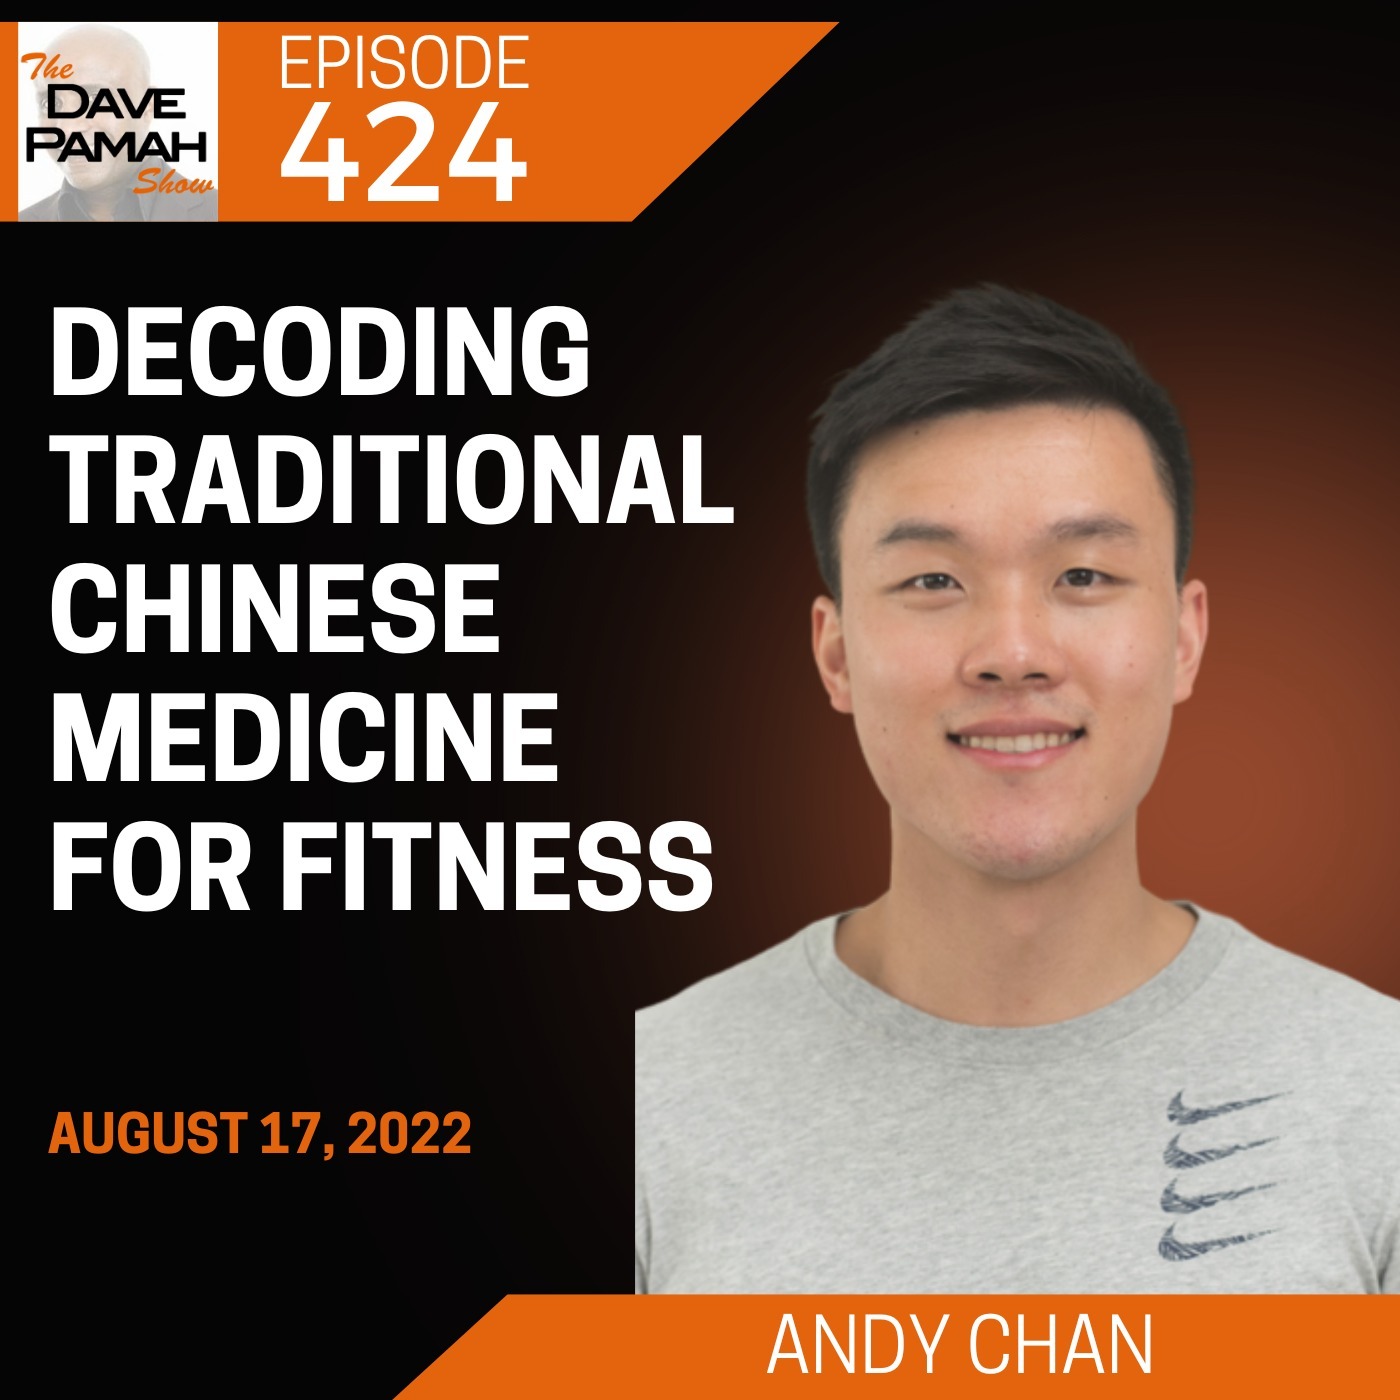 Decoding traditional Chinese medicine for fitness with Andy Chan Image